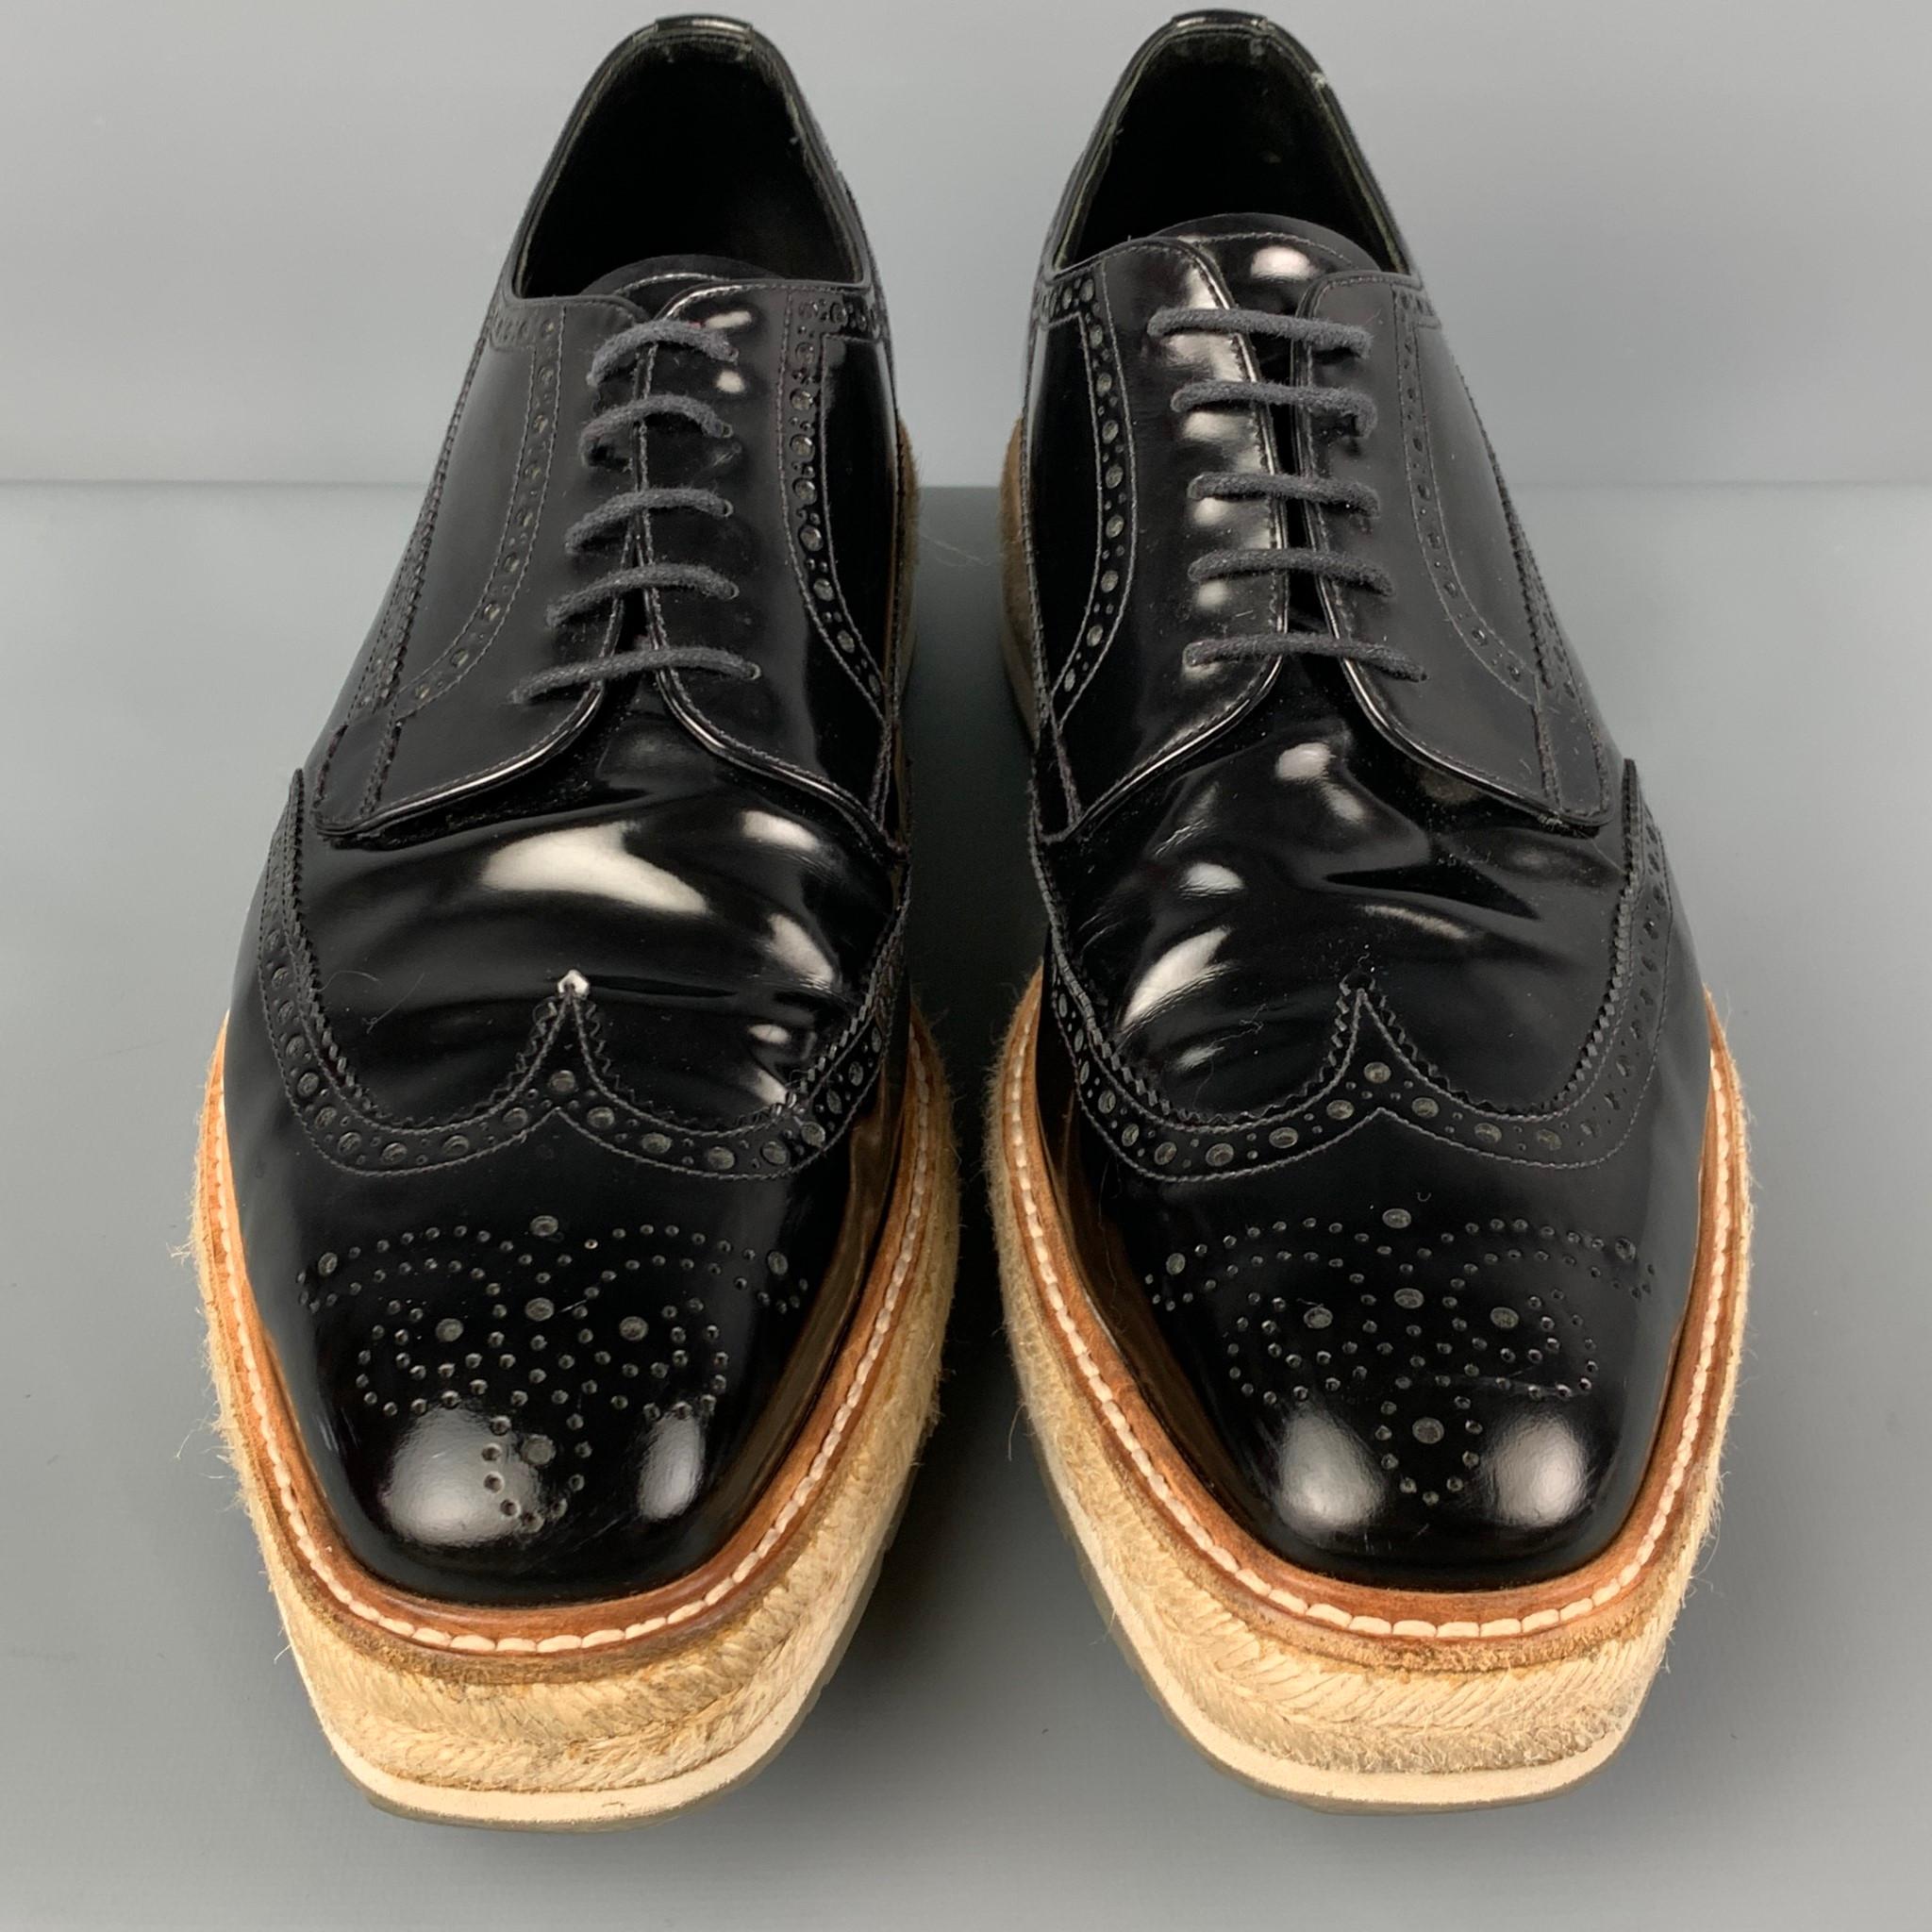 Men's PRADA Size 10.5 Black Perforated Leather Wingtip Lace Up Shoes